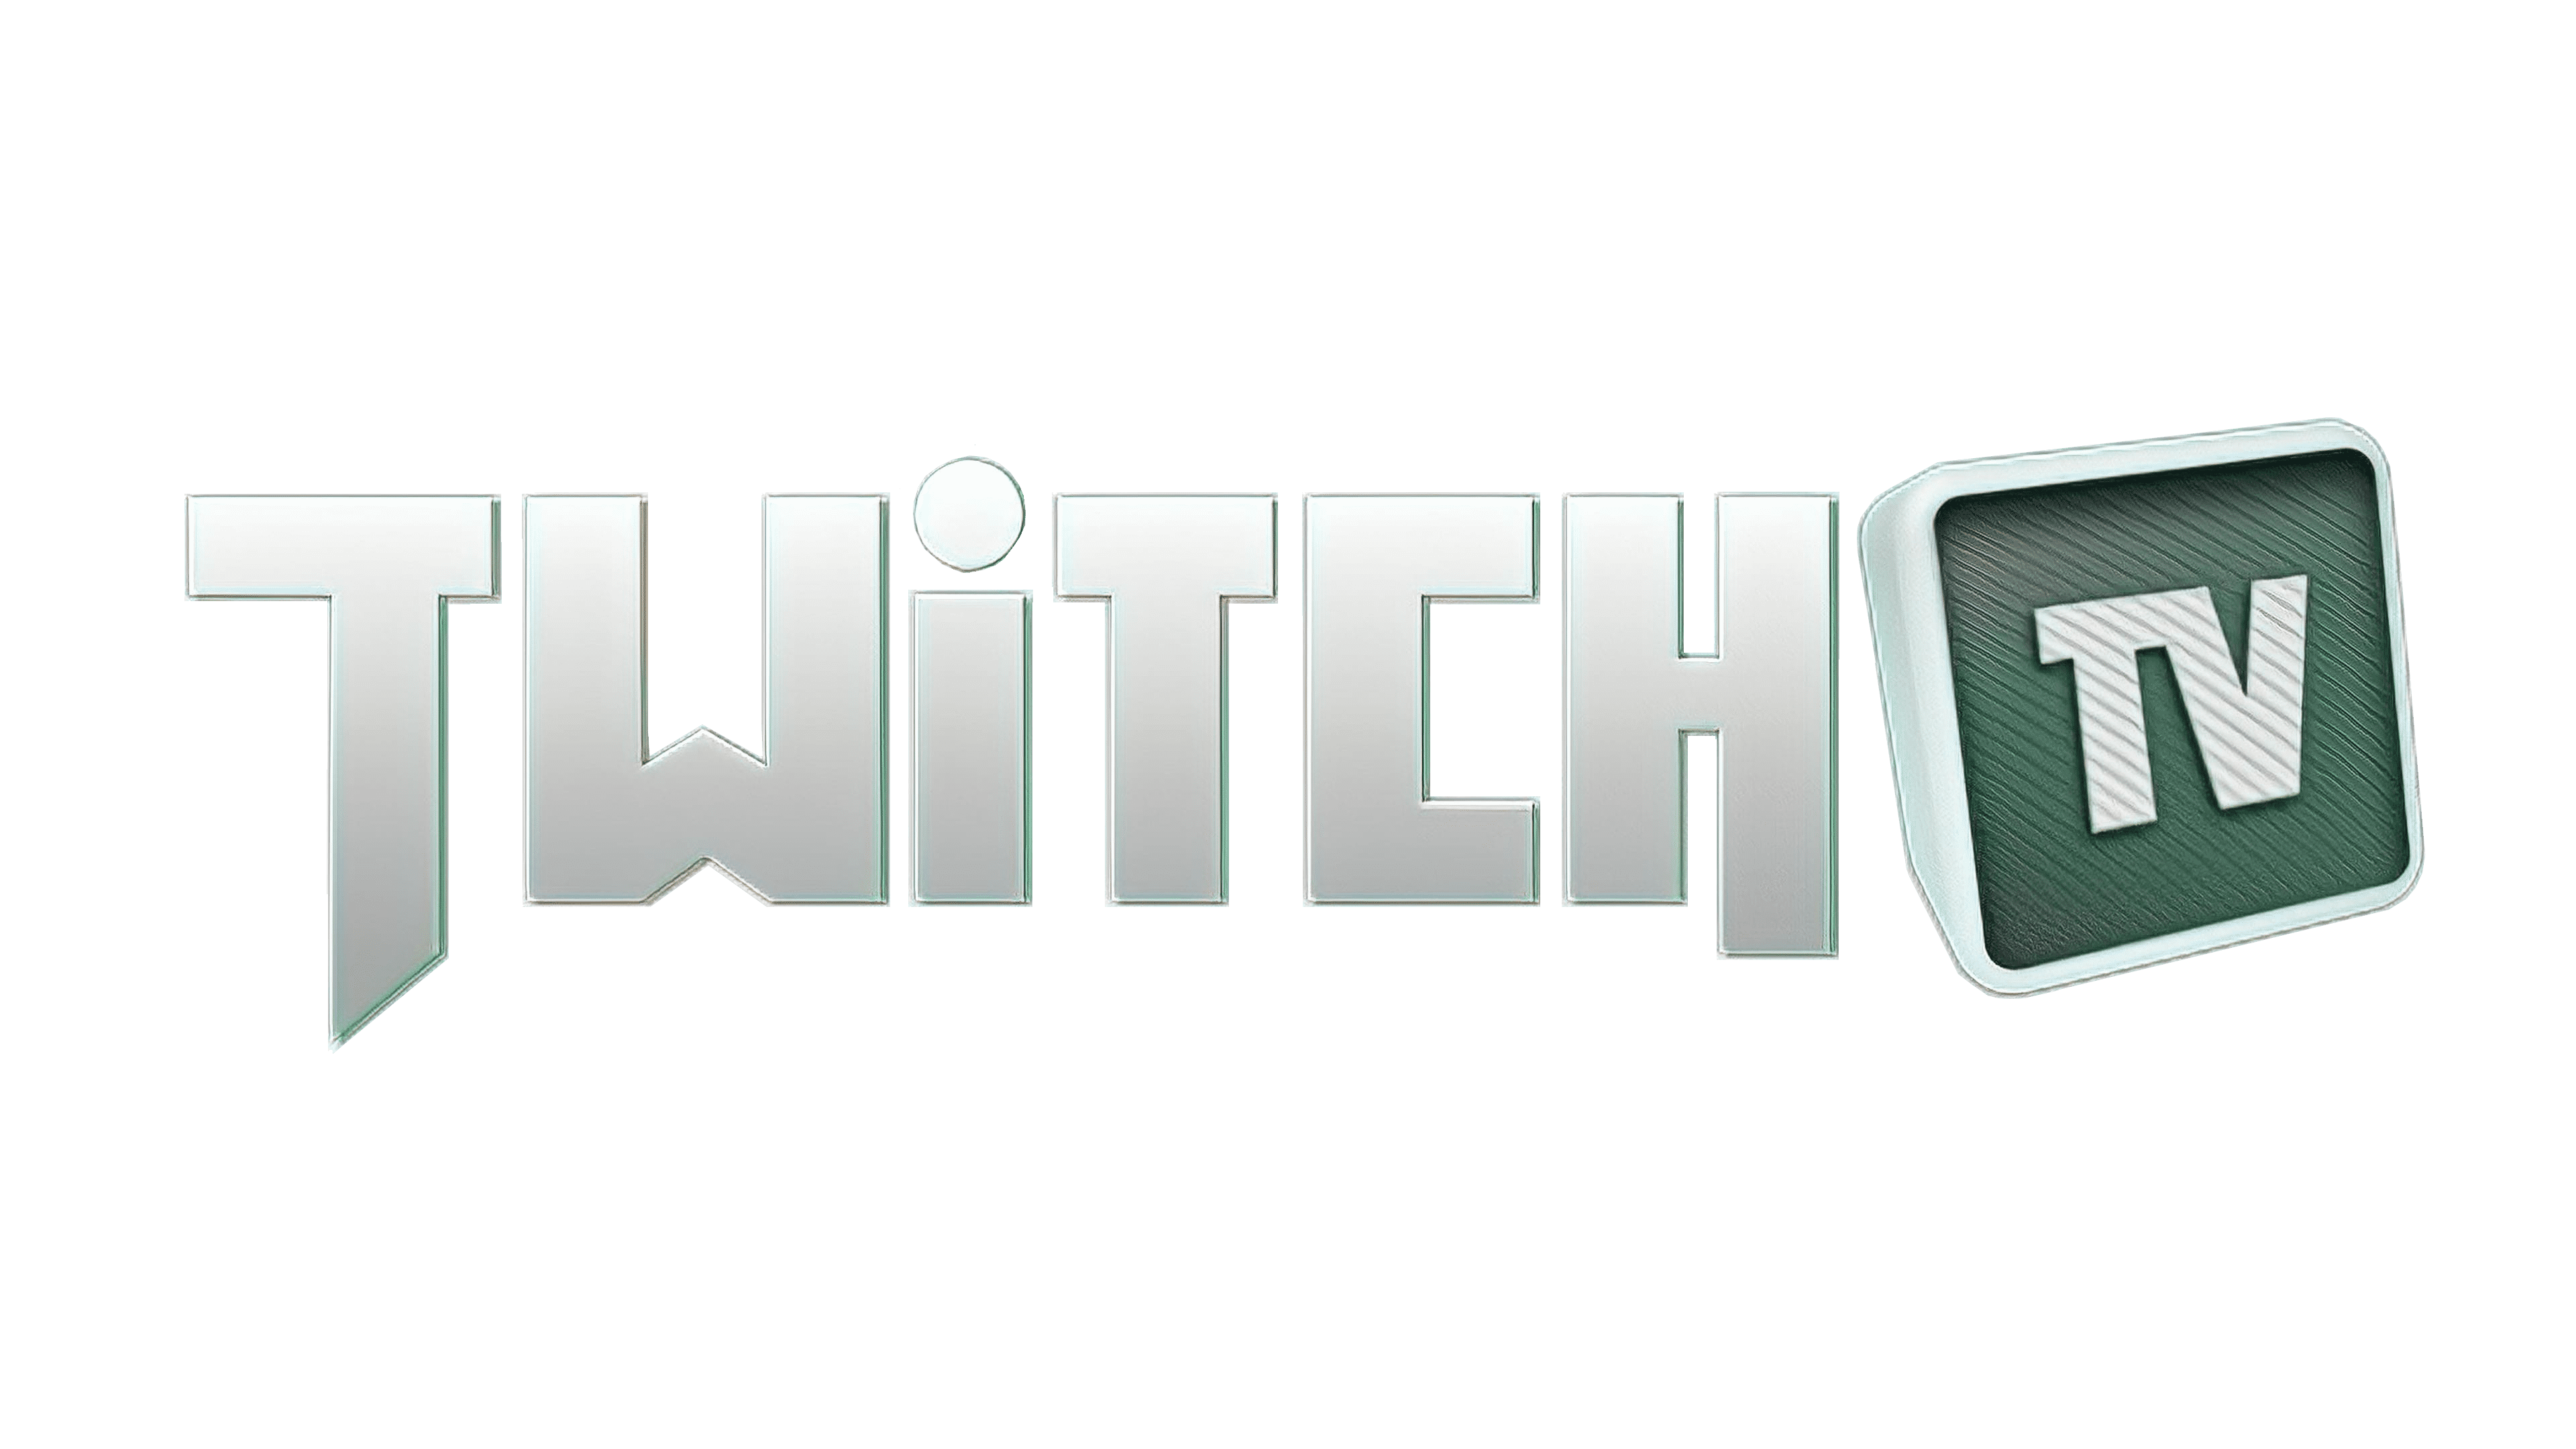 Twitch Logo And Symbol Meaning History Sign